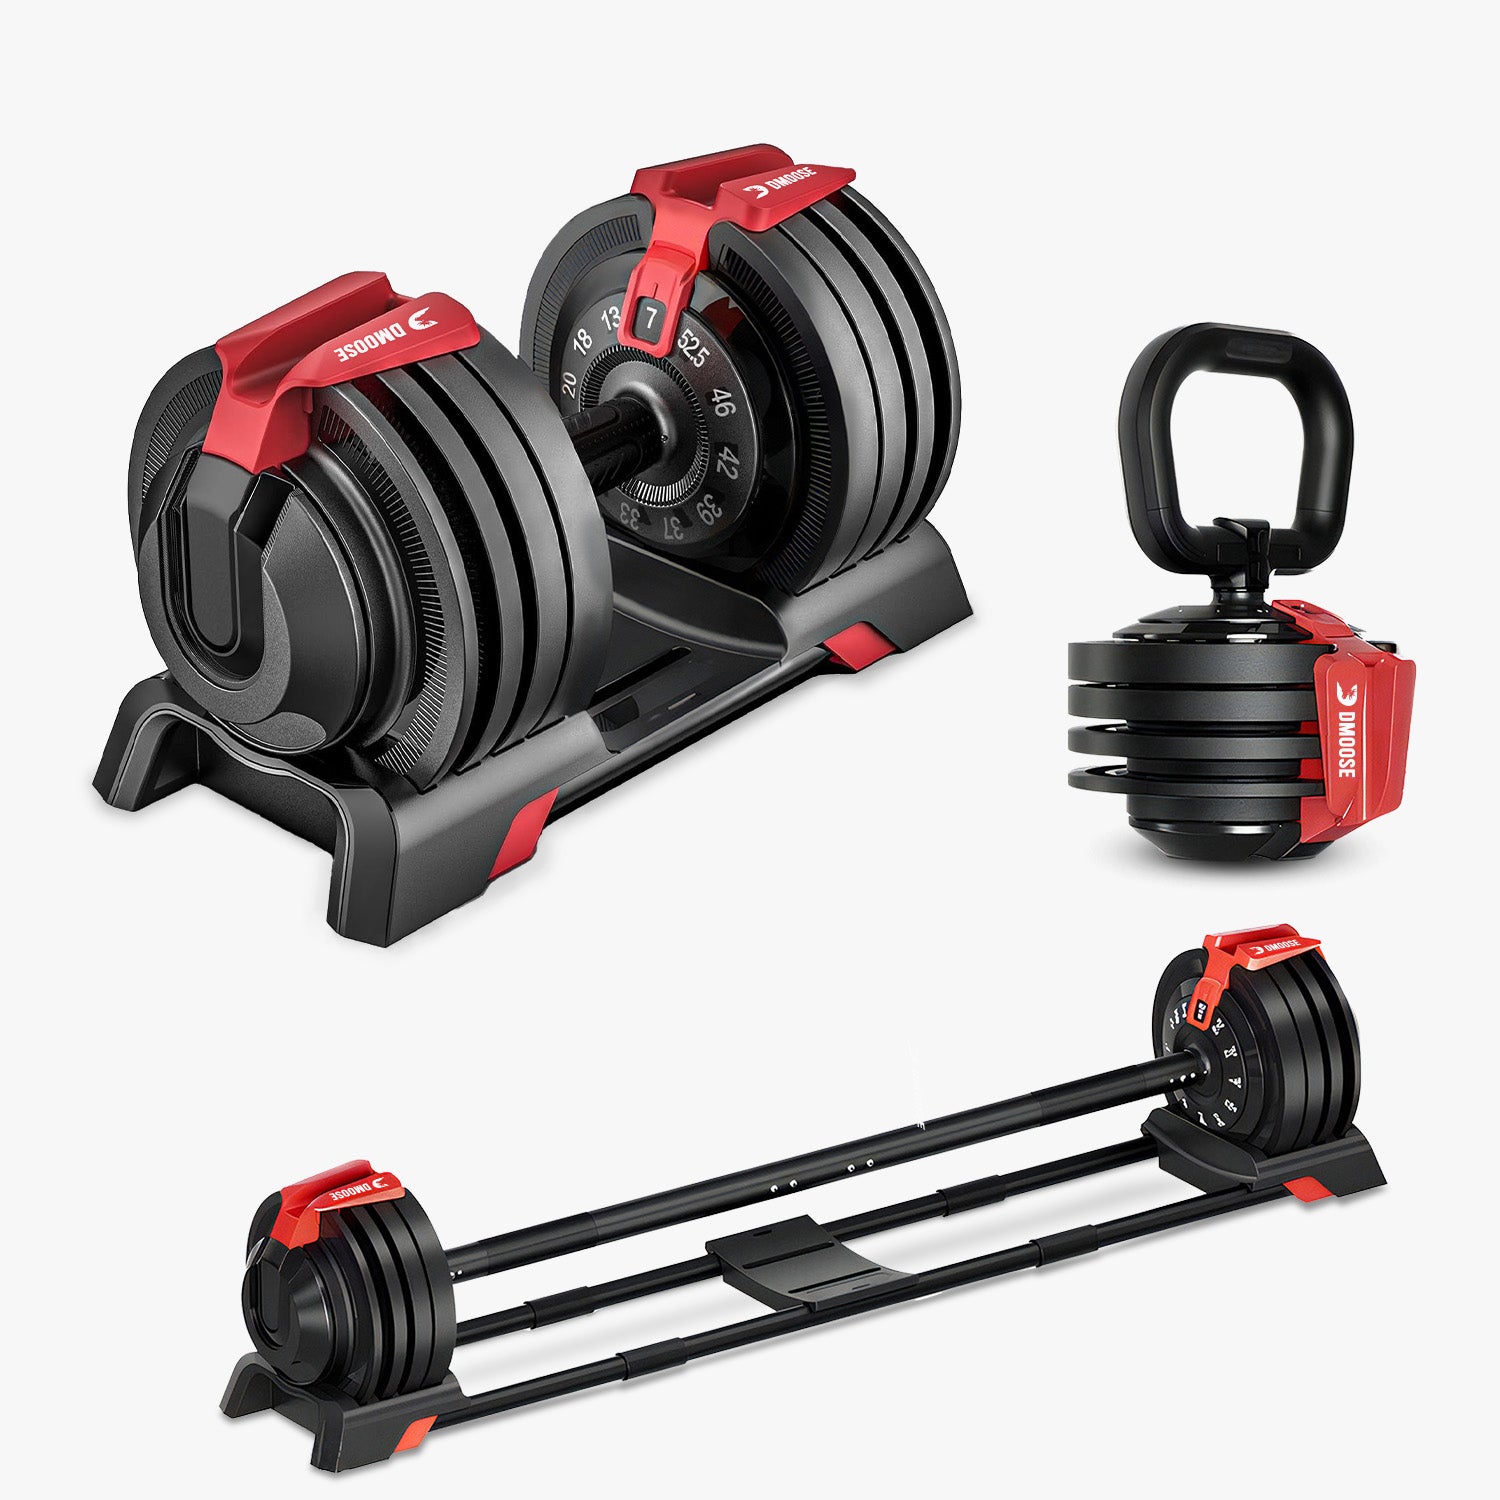 Top 25 Holiday Gift Ideas For Gym Bros •